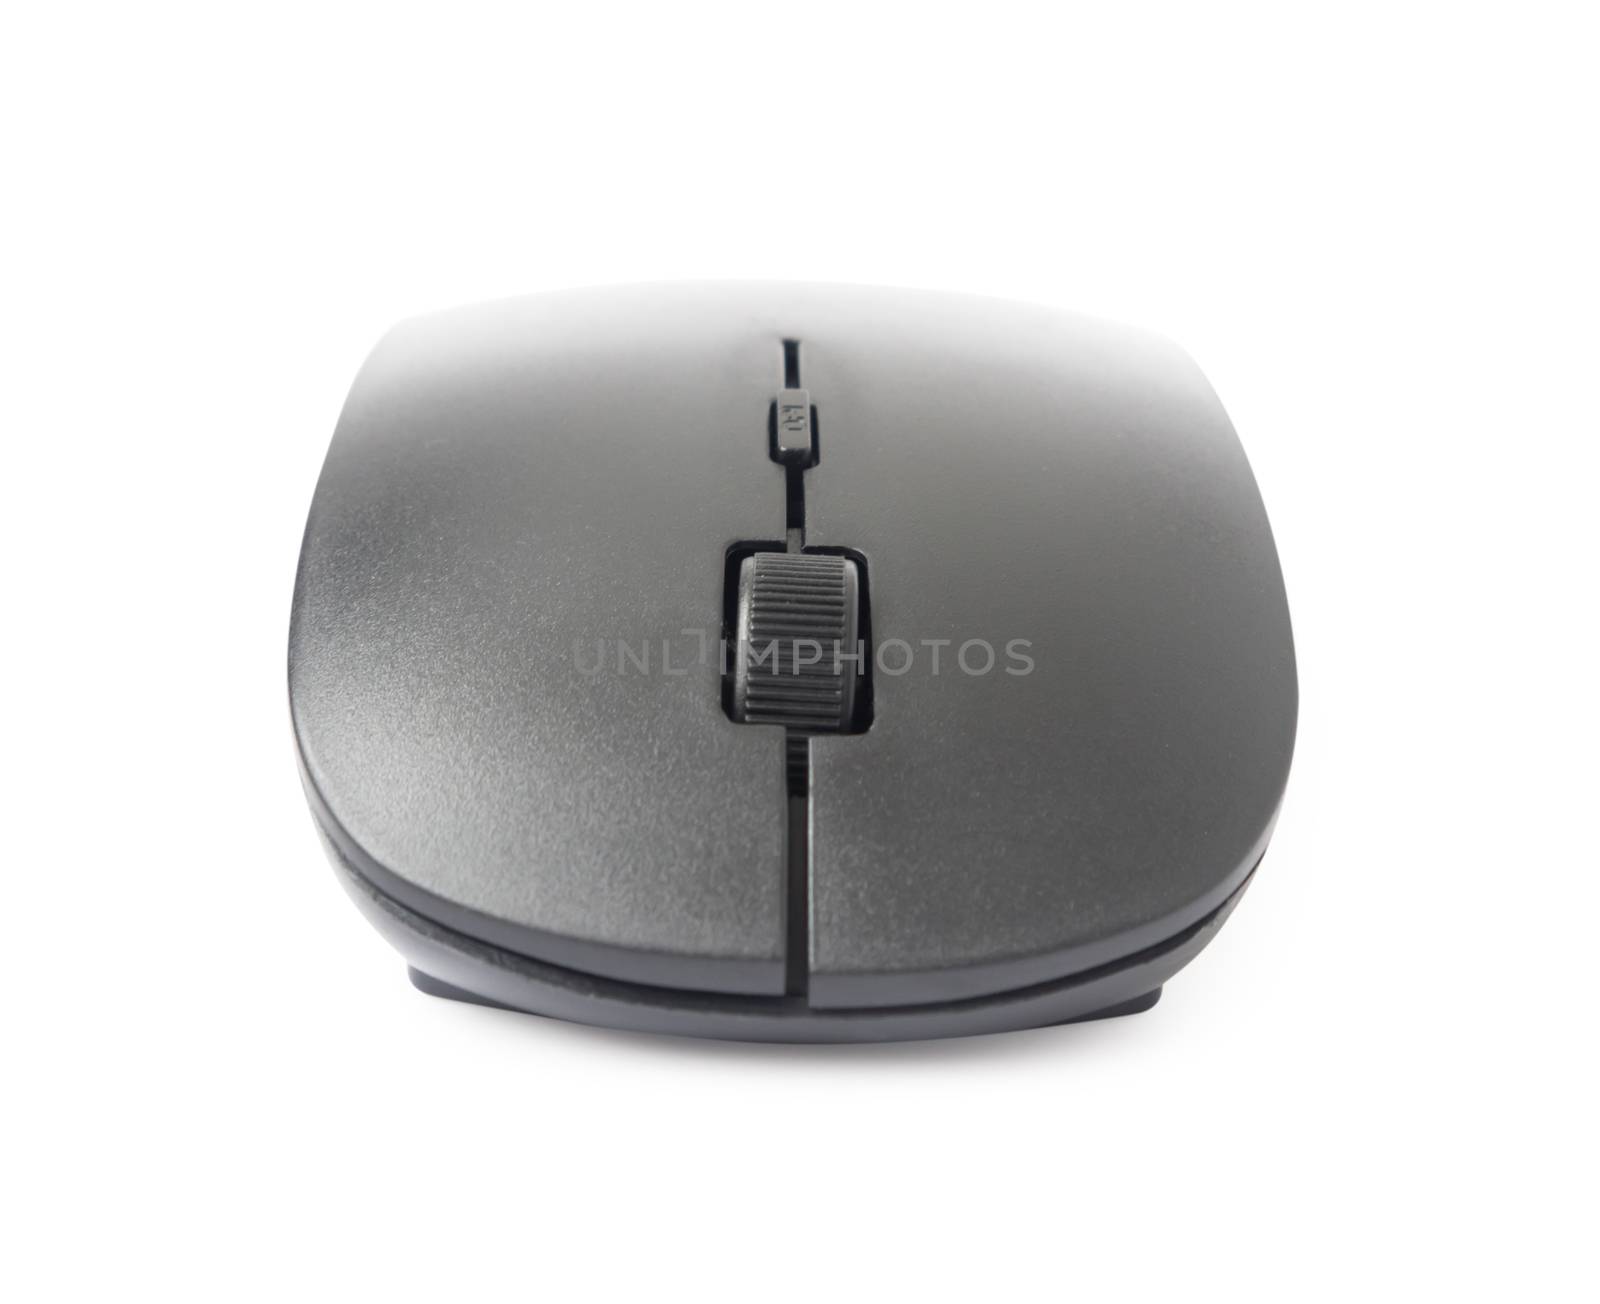 Black wireless computer mouse isolated on white background with  by pt.pongsak@gmail.com